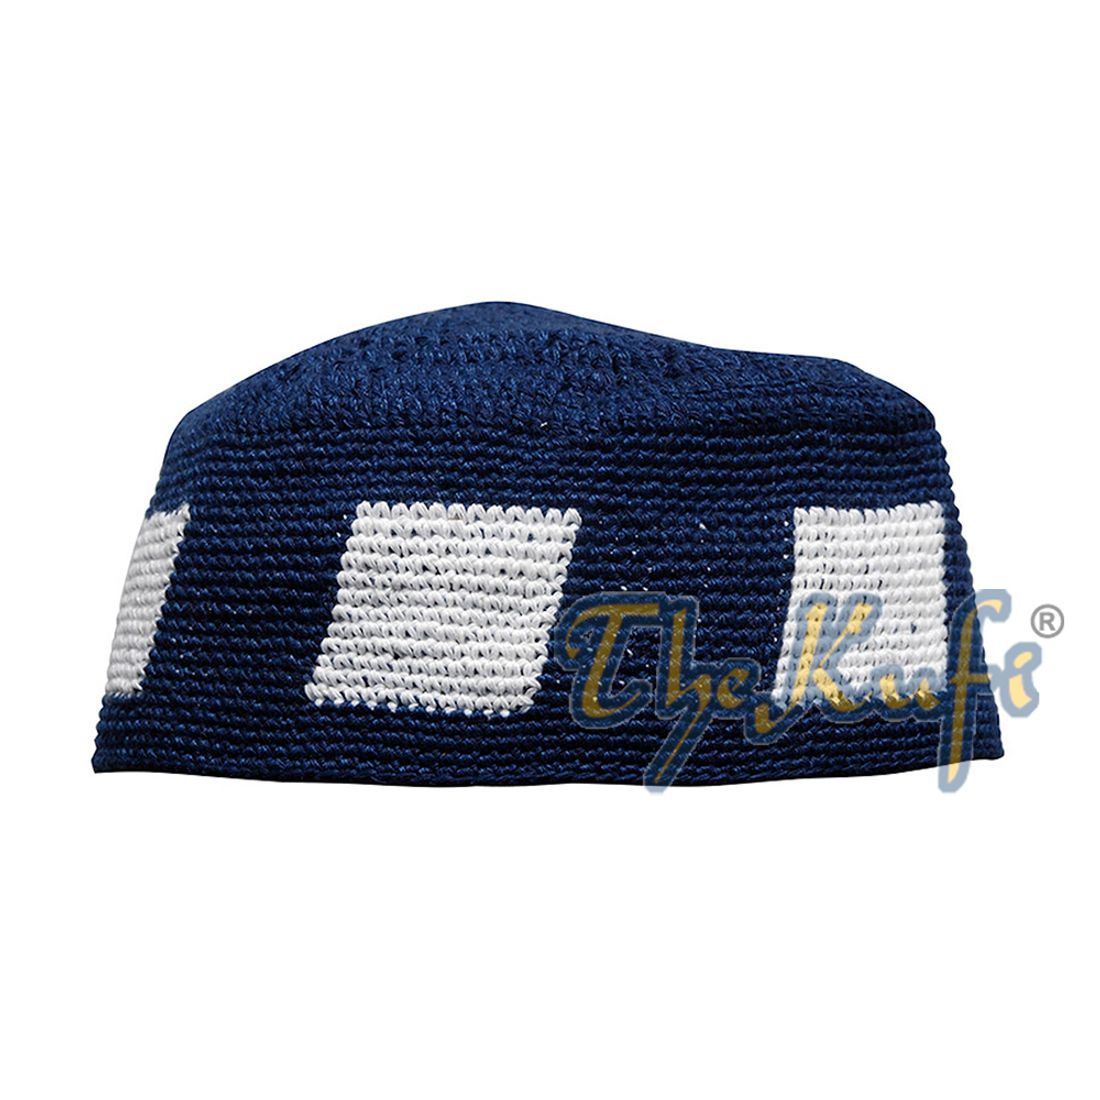 Hand-crocheted Dark Blue Kufi With White Squares For Kids